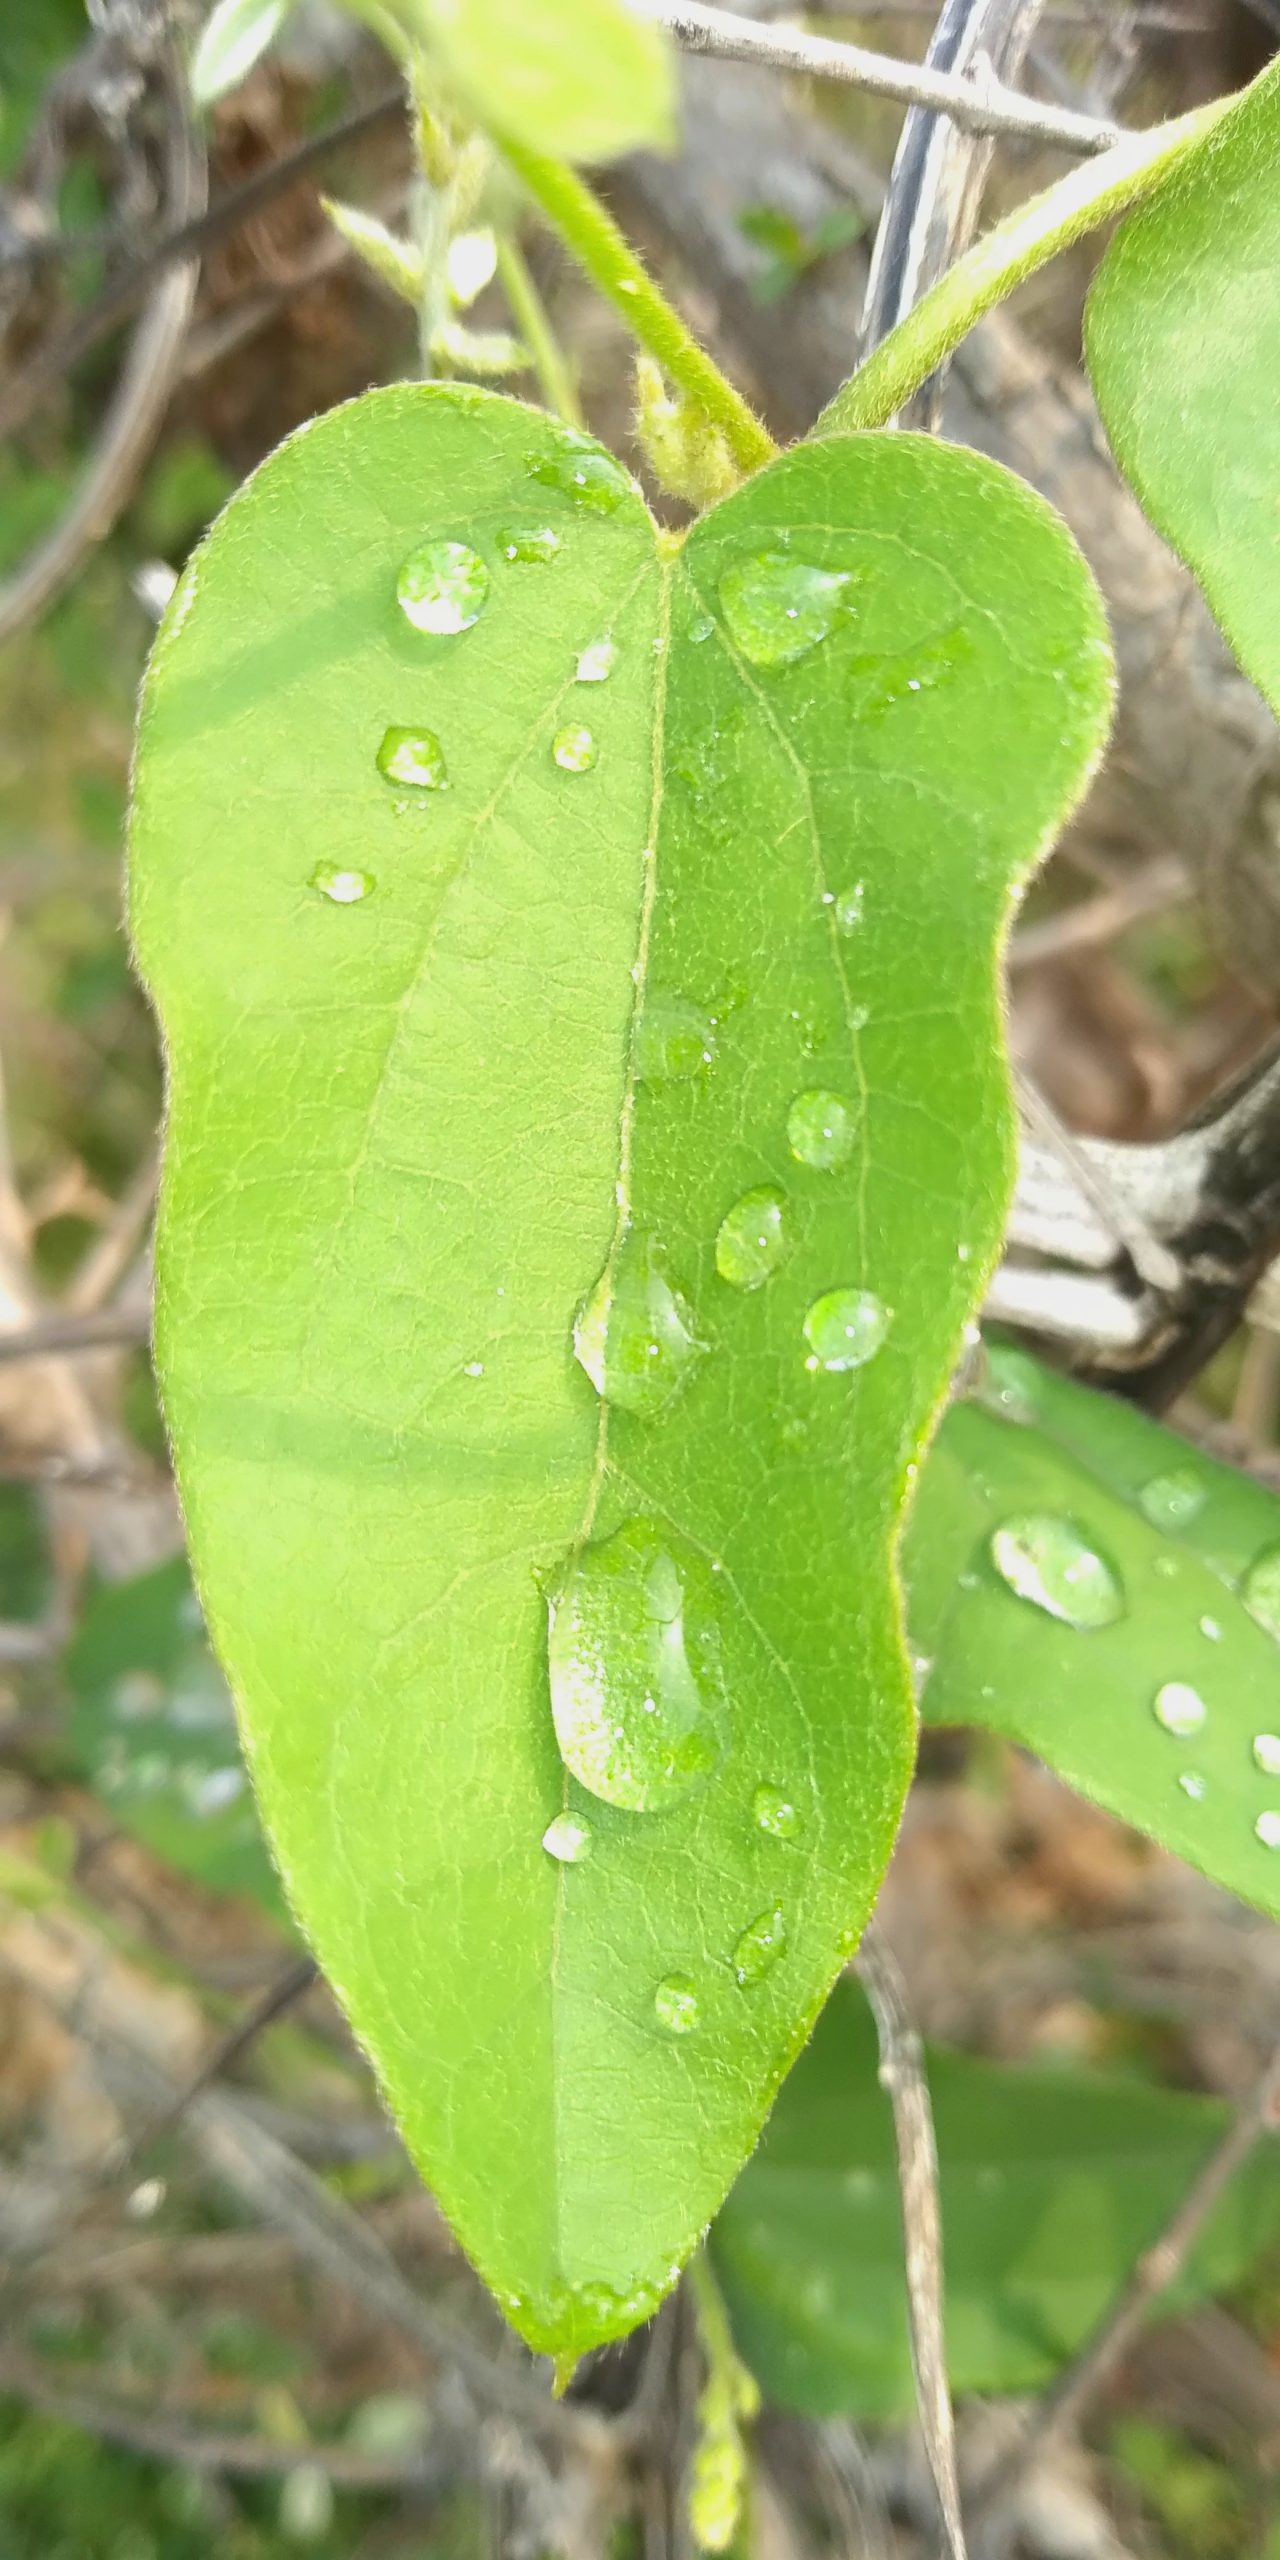 Water drop on the leaf